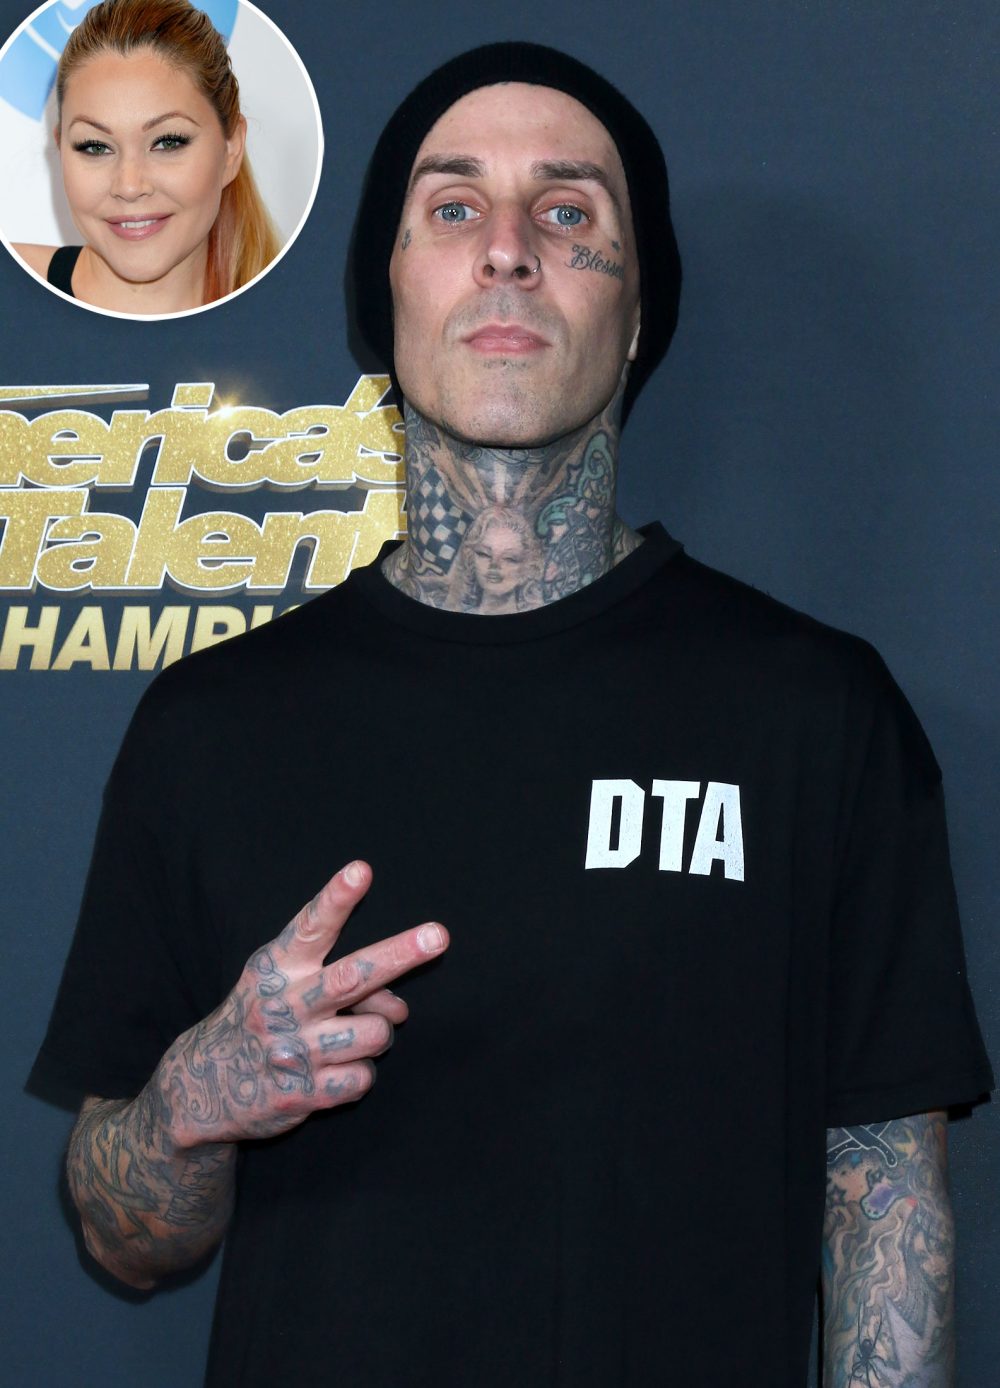 Is Travis Barker’s ‘Don’t Trust Anyone’ Tattoo Directed at Shanna Moakler?